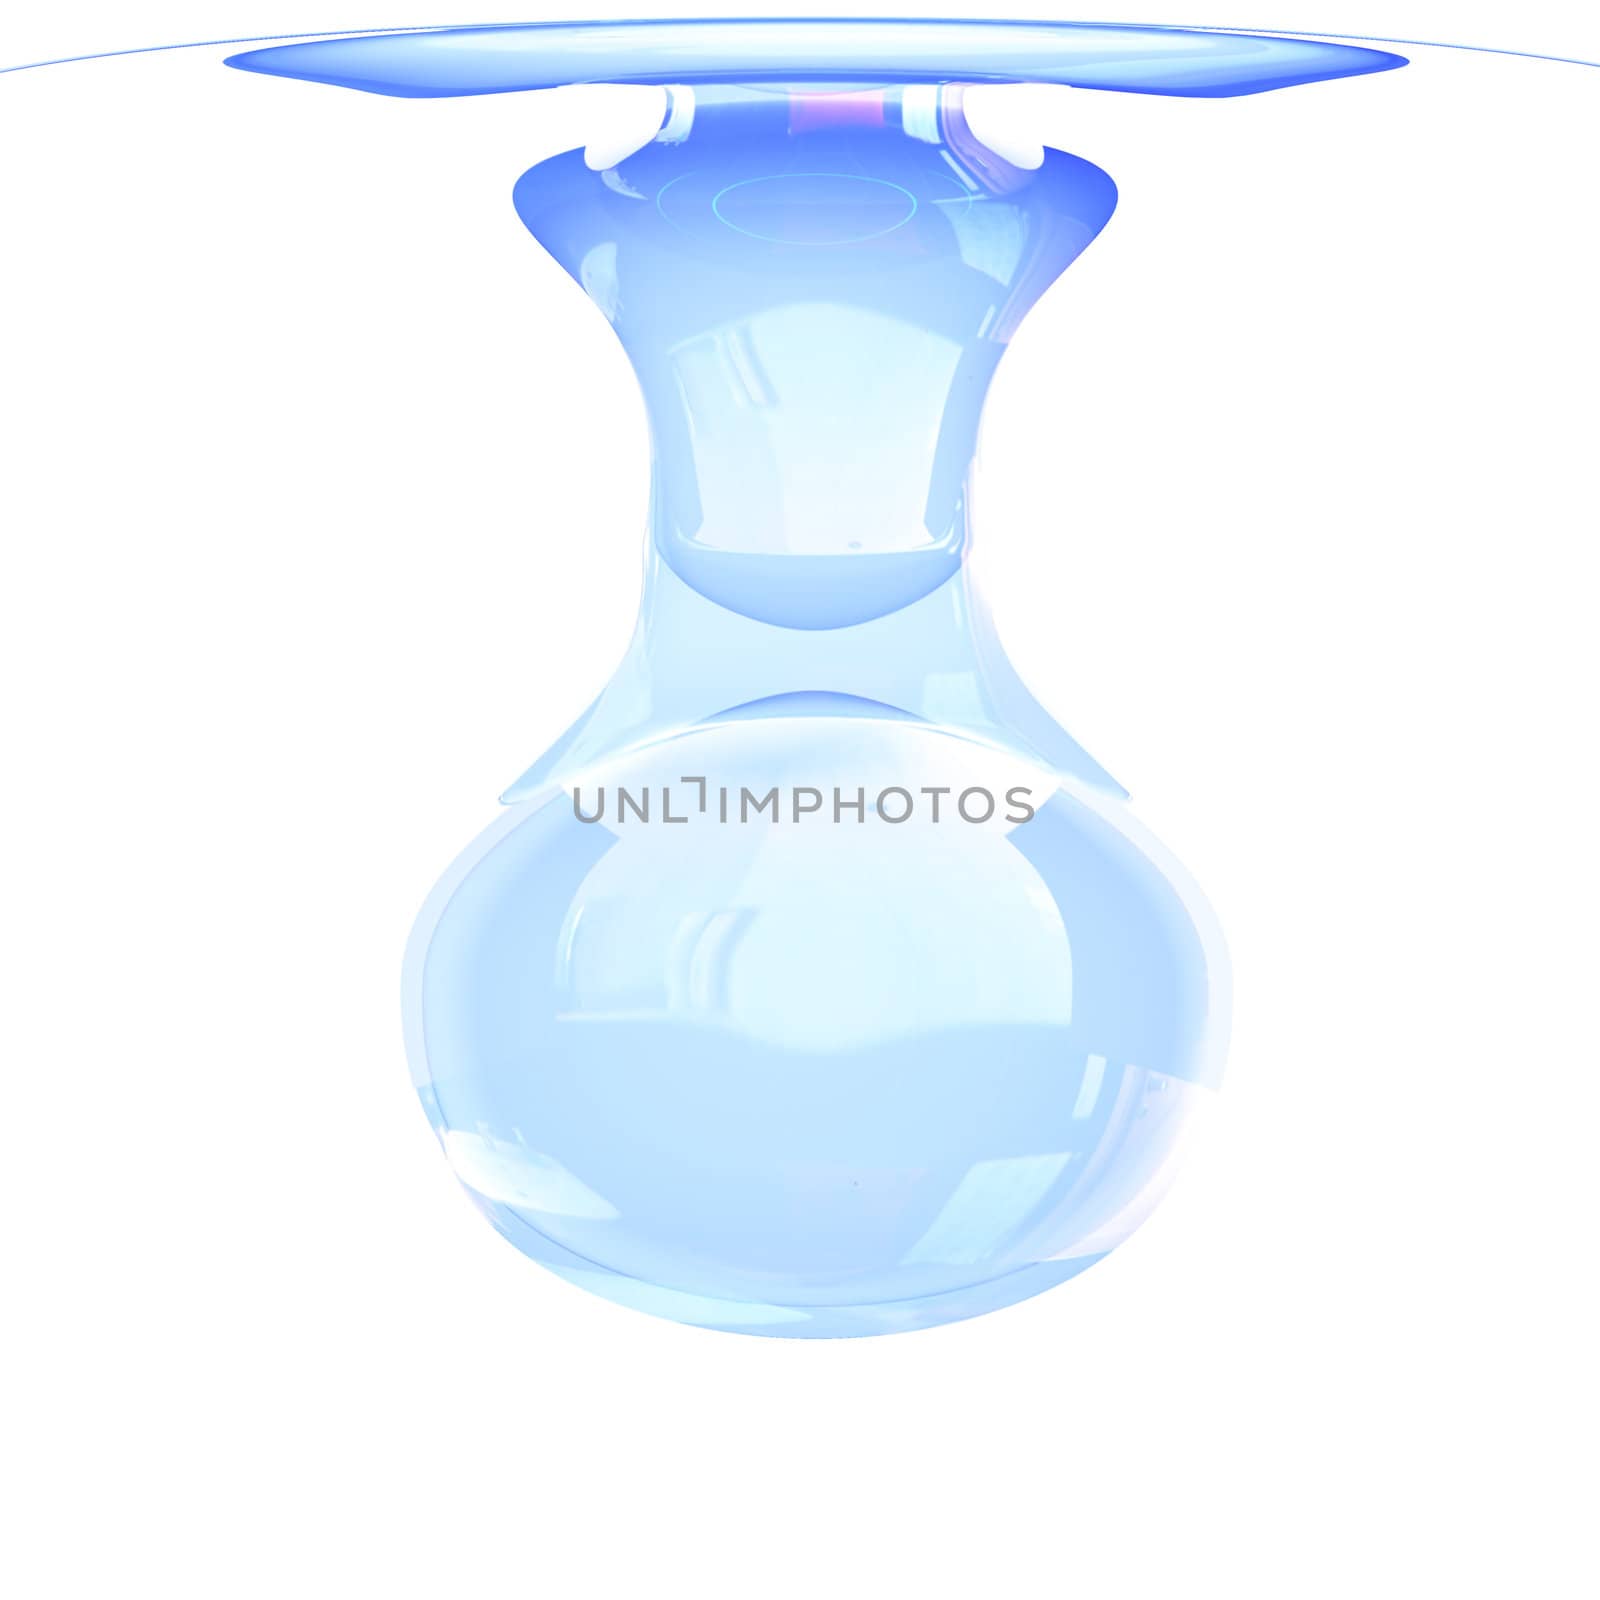 Bright blue clear drop of water on a white background